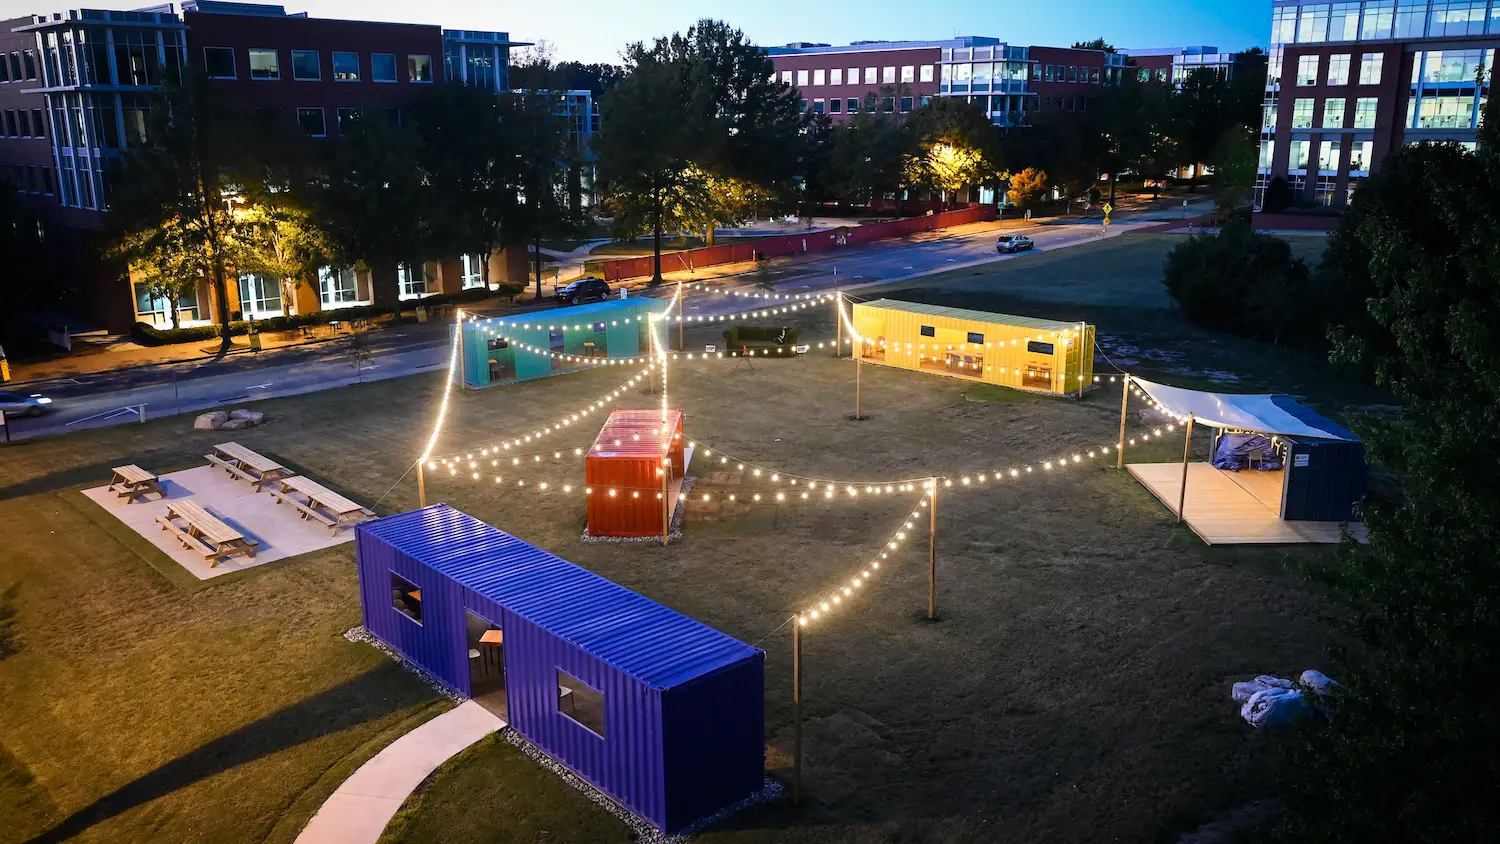 The Corner, an open-air gathering space for the Centennial Campus community, lit up at night.